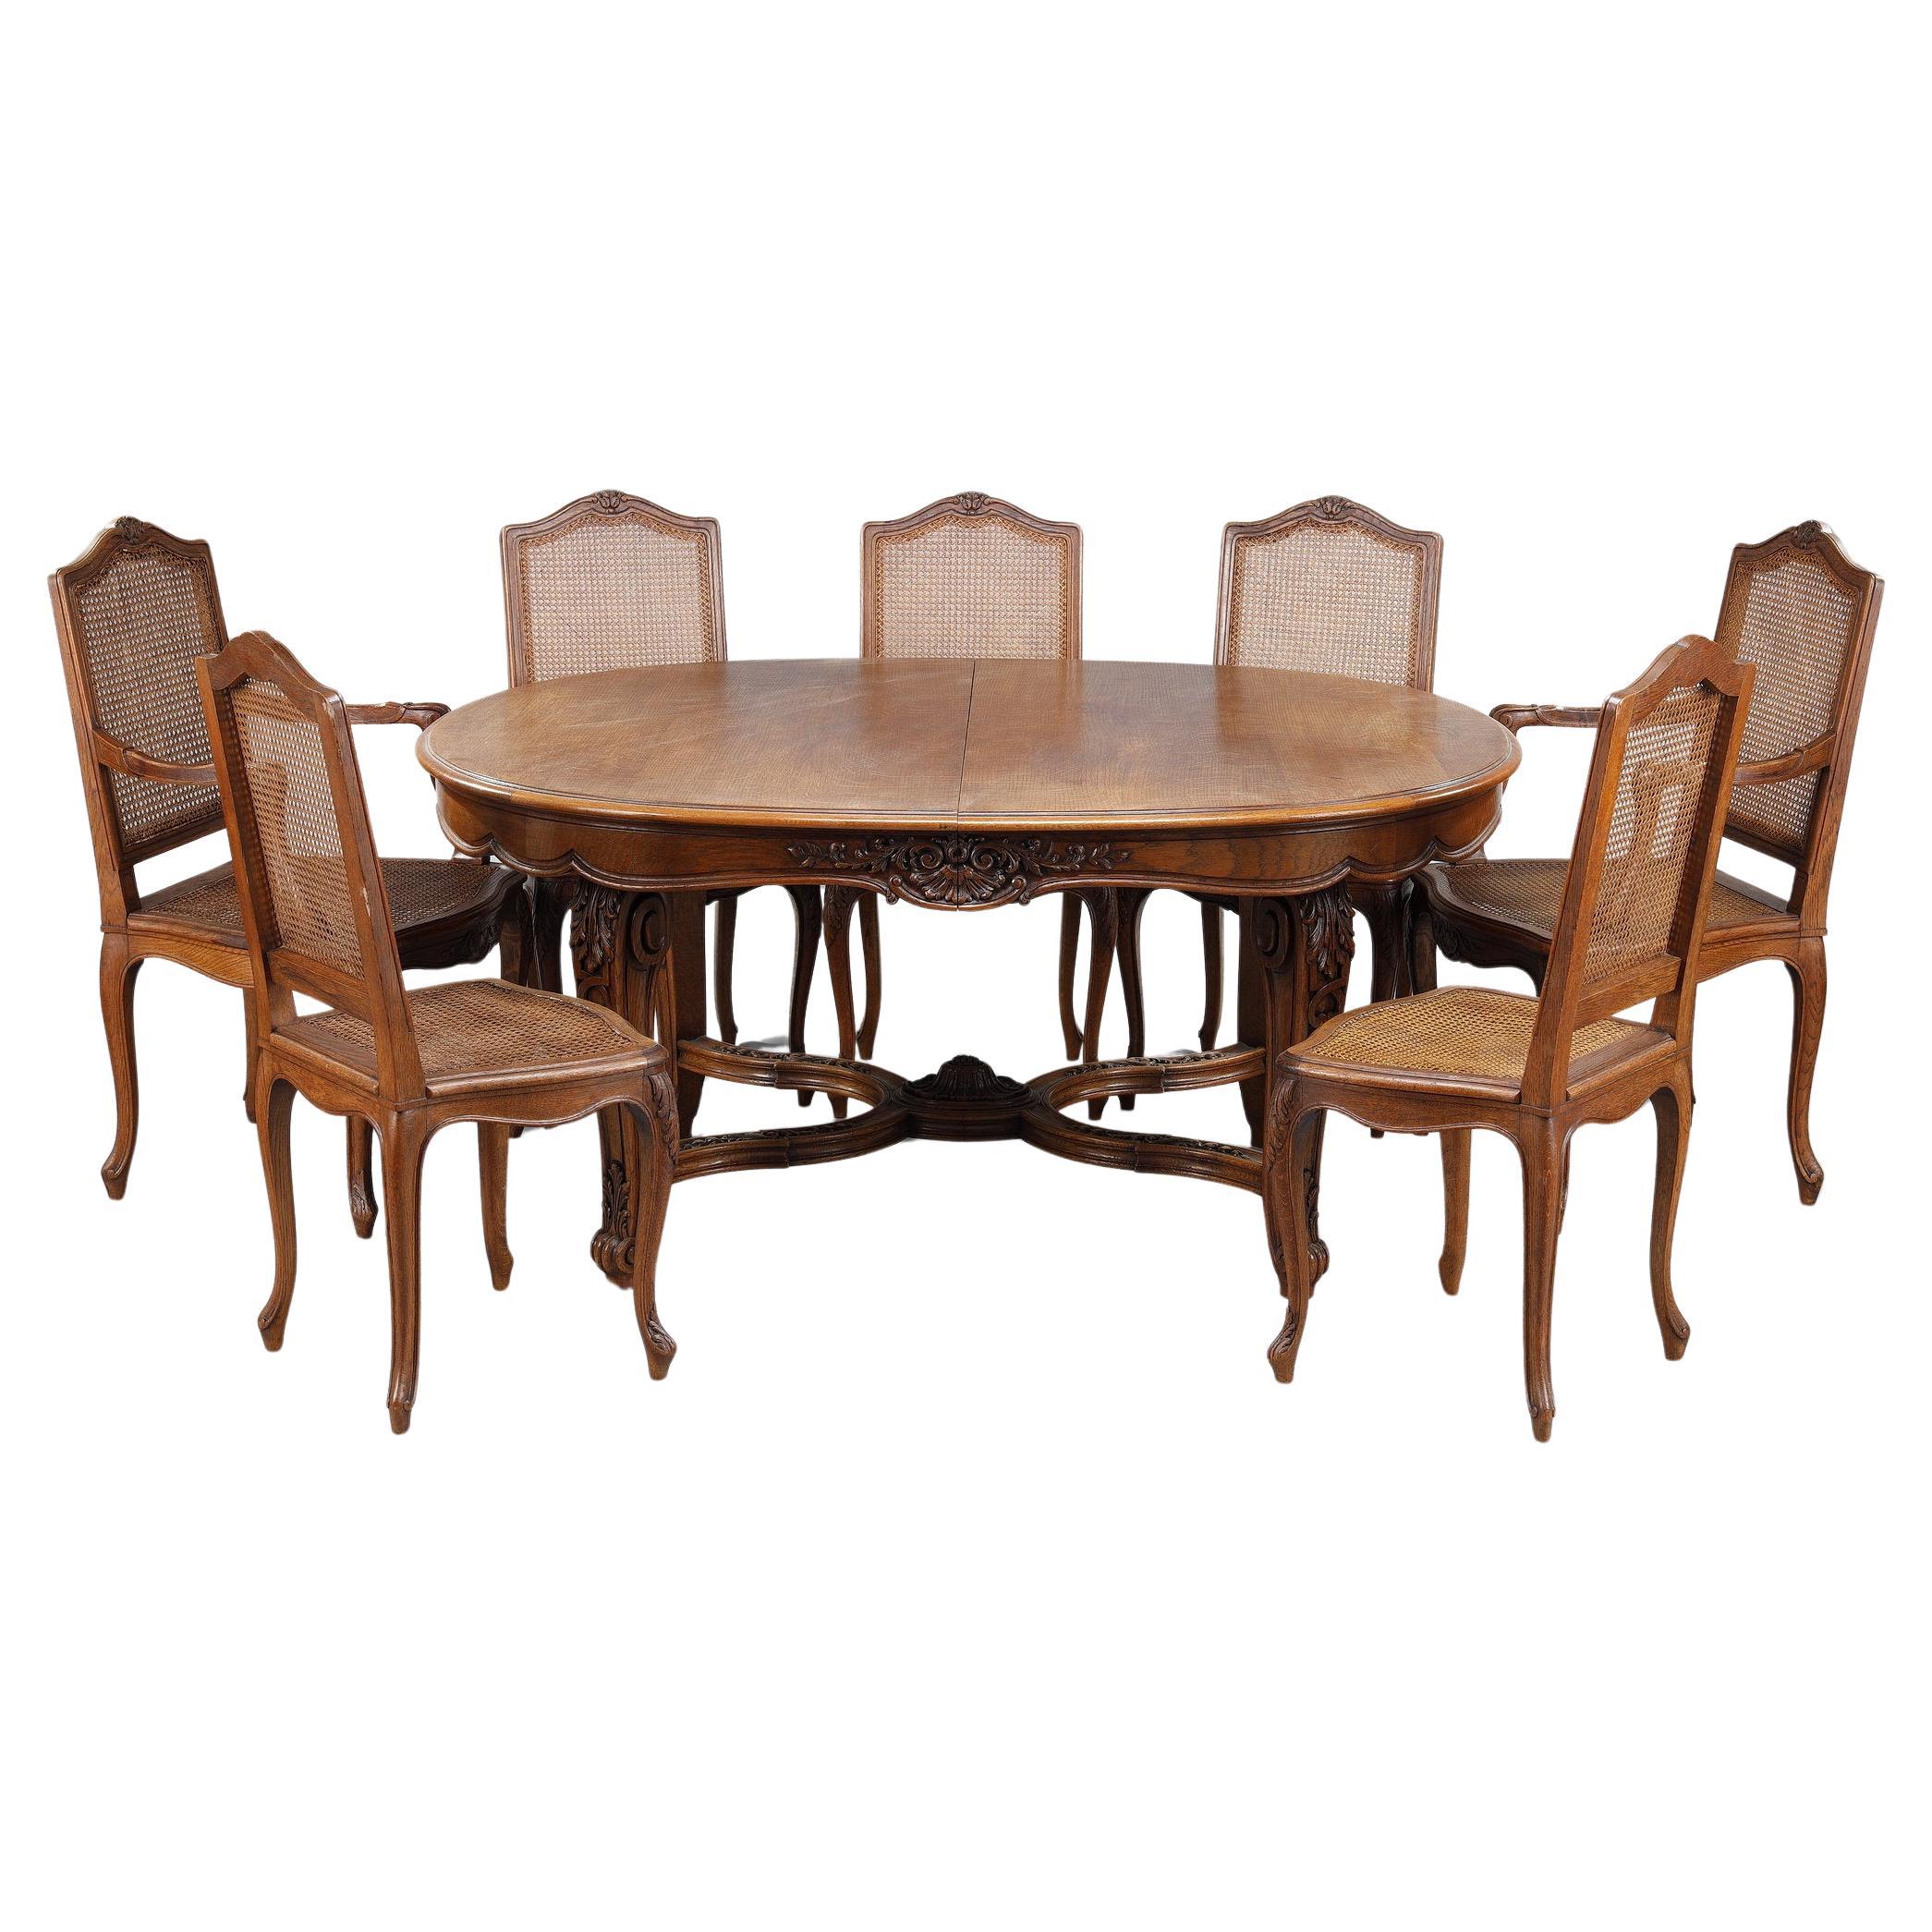 Rengency-style dining table, 9 chairs and 2 armchairs 